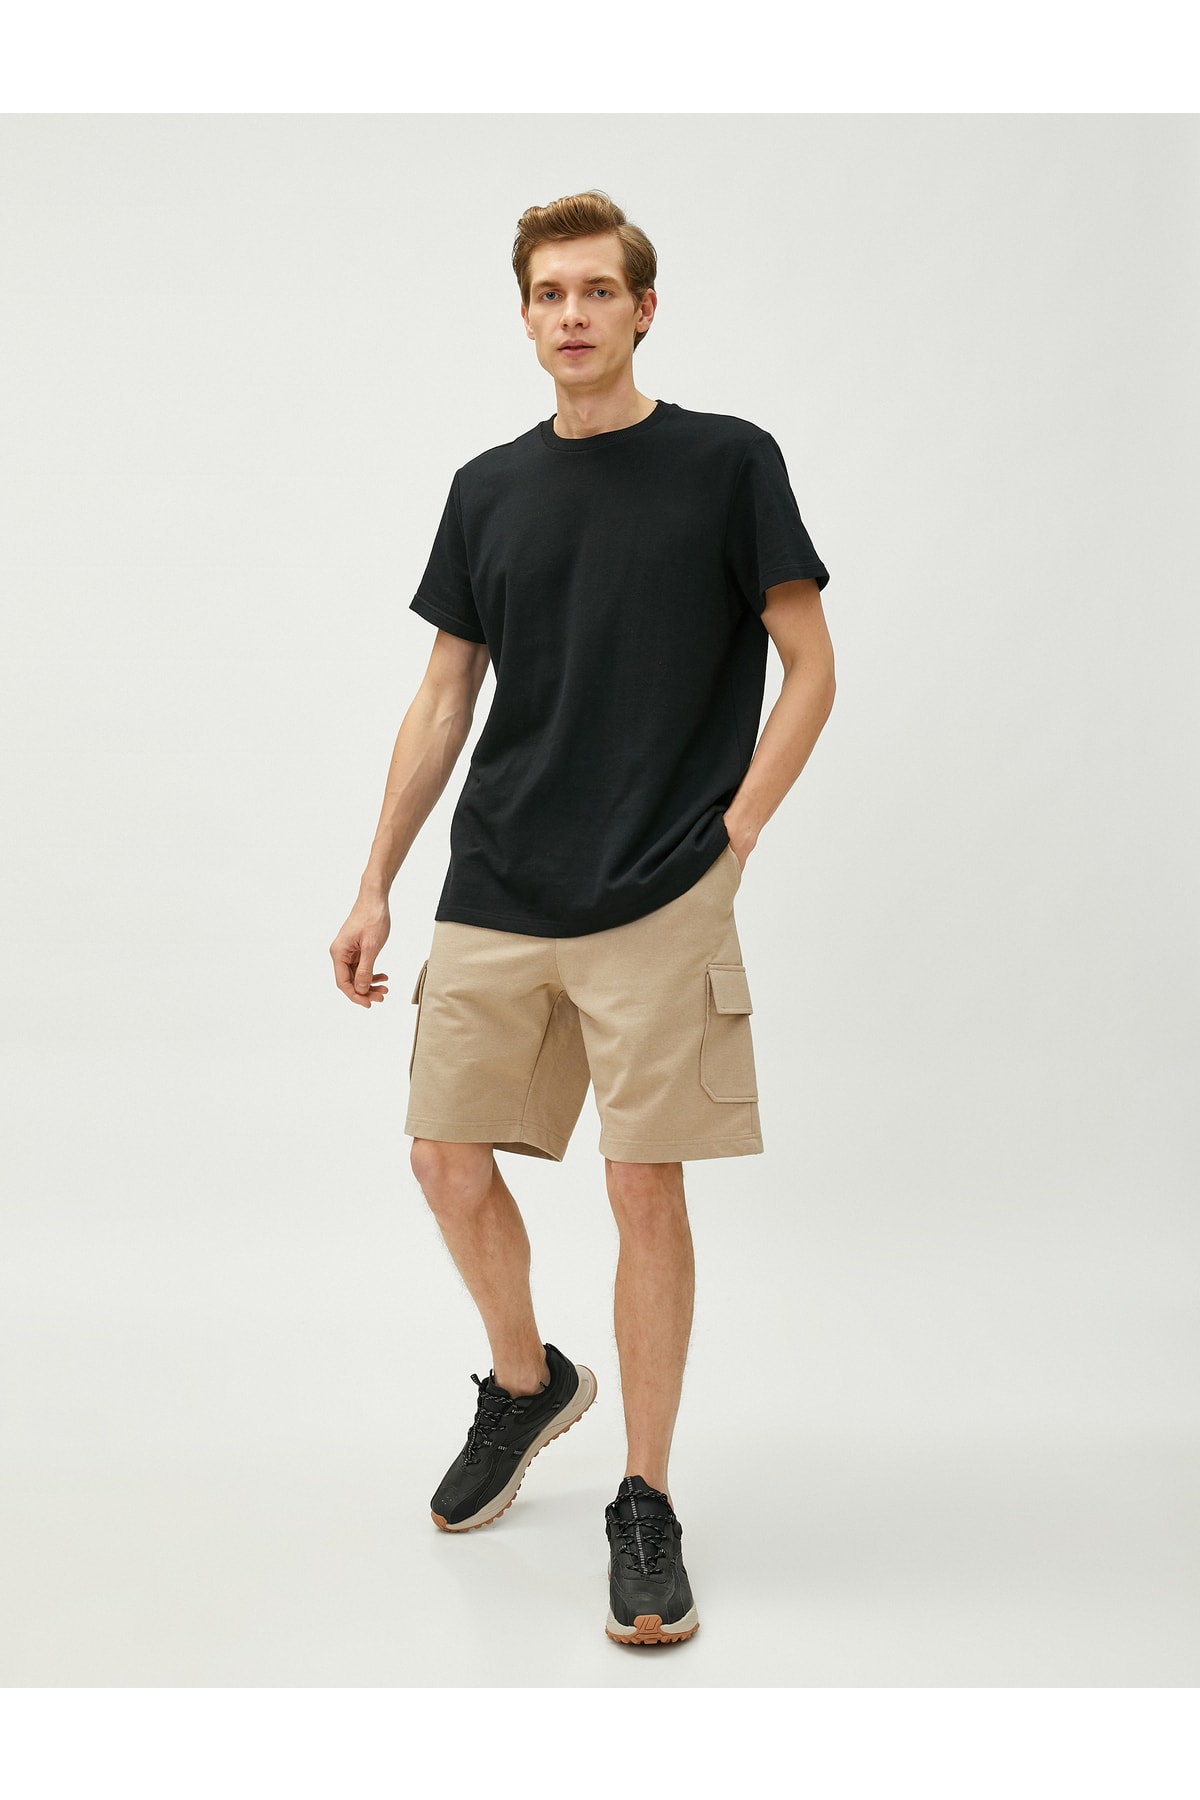 Koton Cargo Shorts With Lace-Up Waist, Slim Fit. Pocket Detailed.